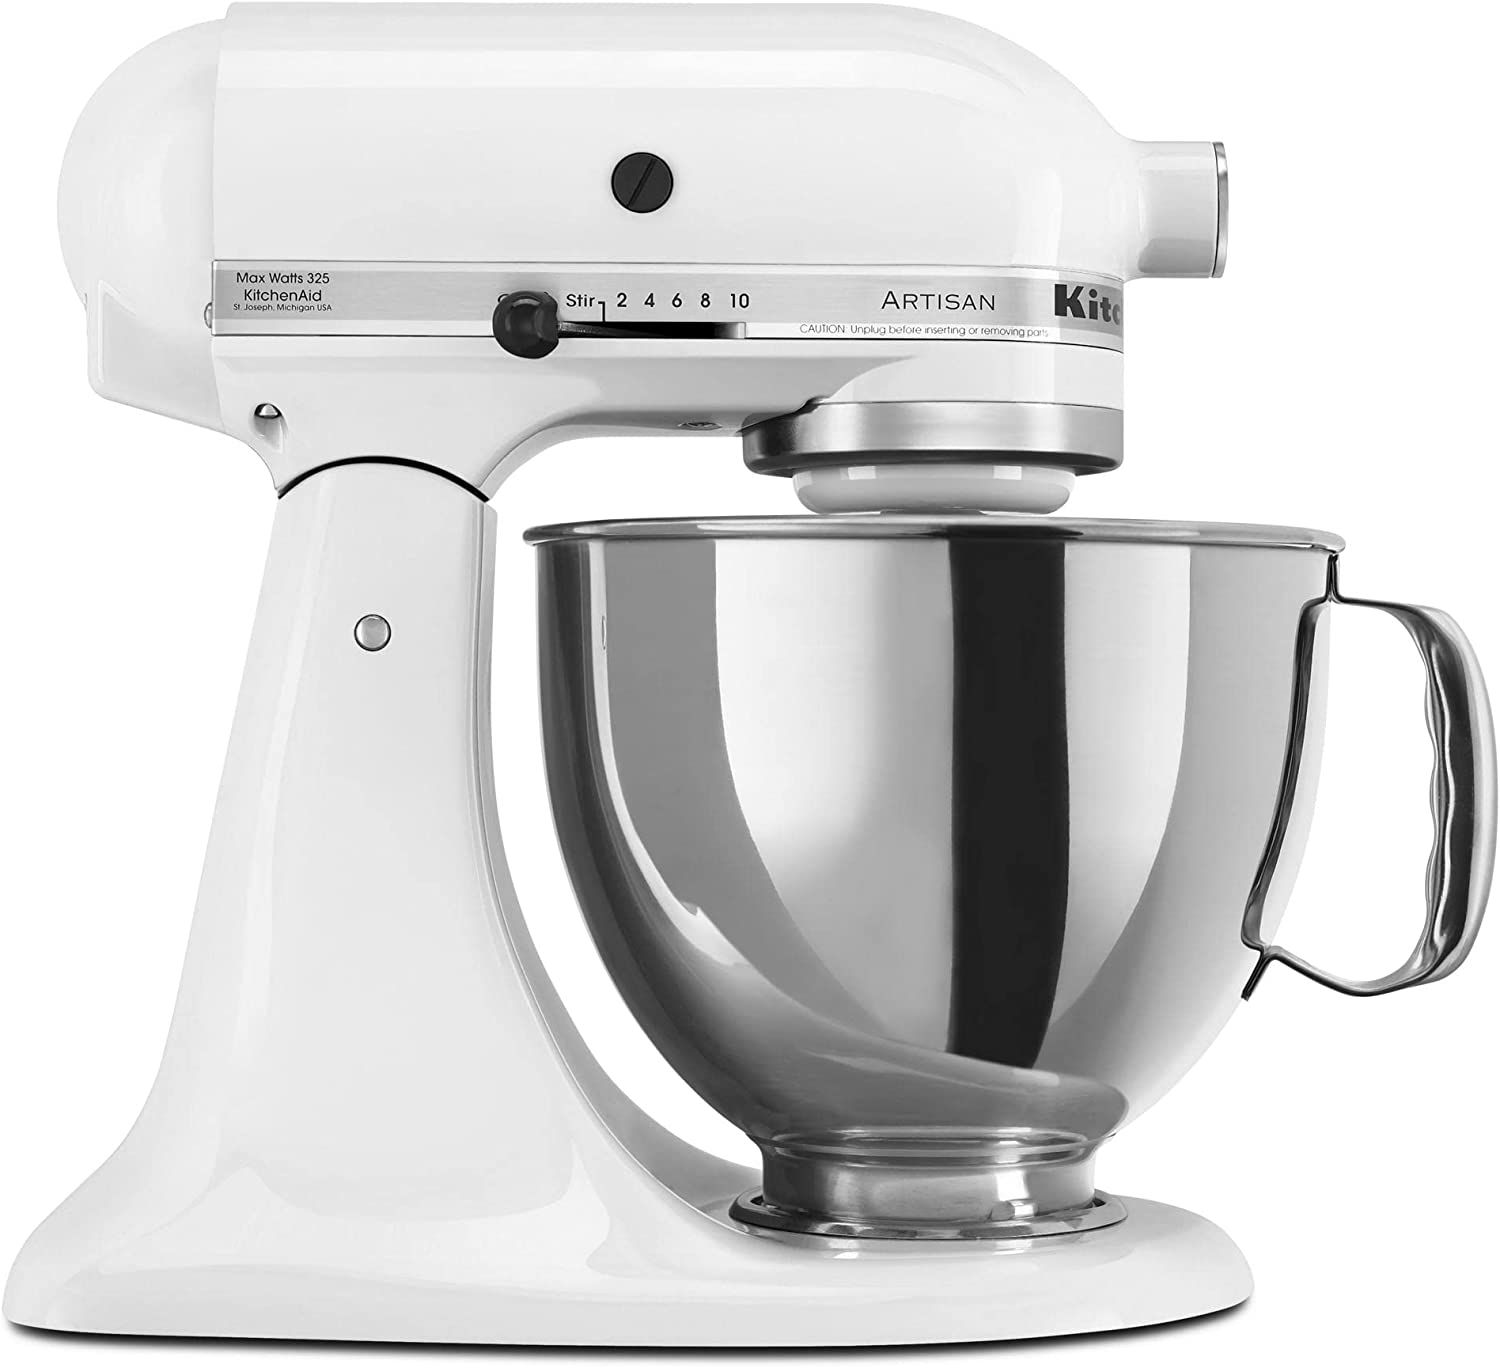 KitchenAid KSM150PSWH Artisan Series 5-Qt. Stand Mixer with Pouring Shield - White | Amazon (US)